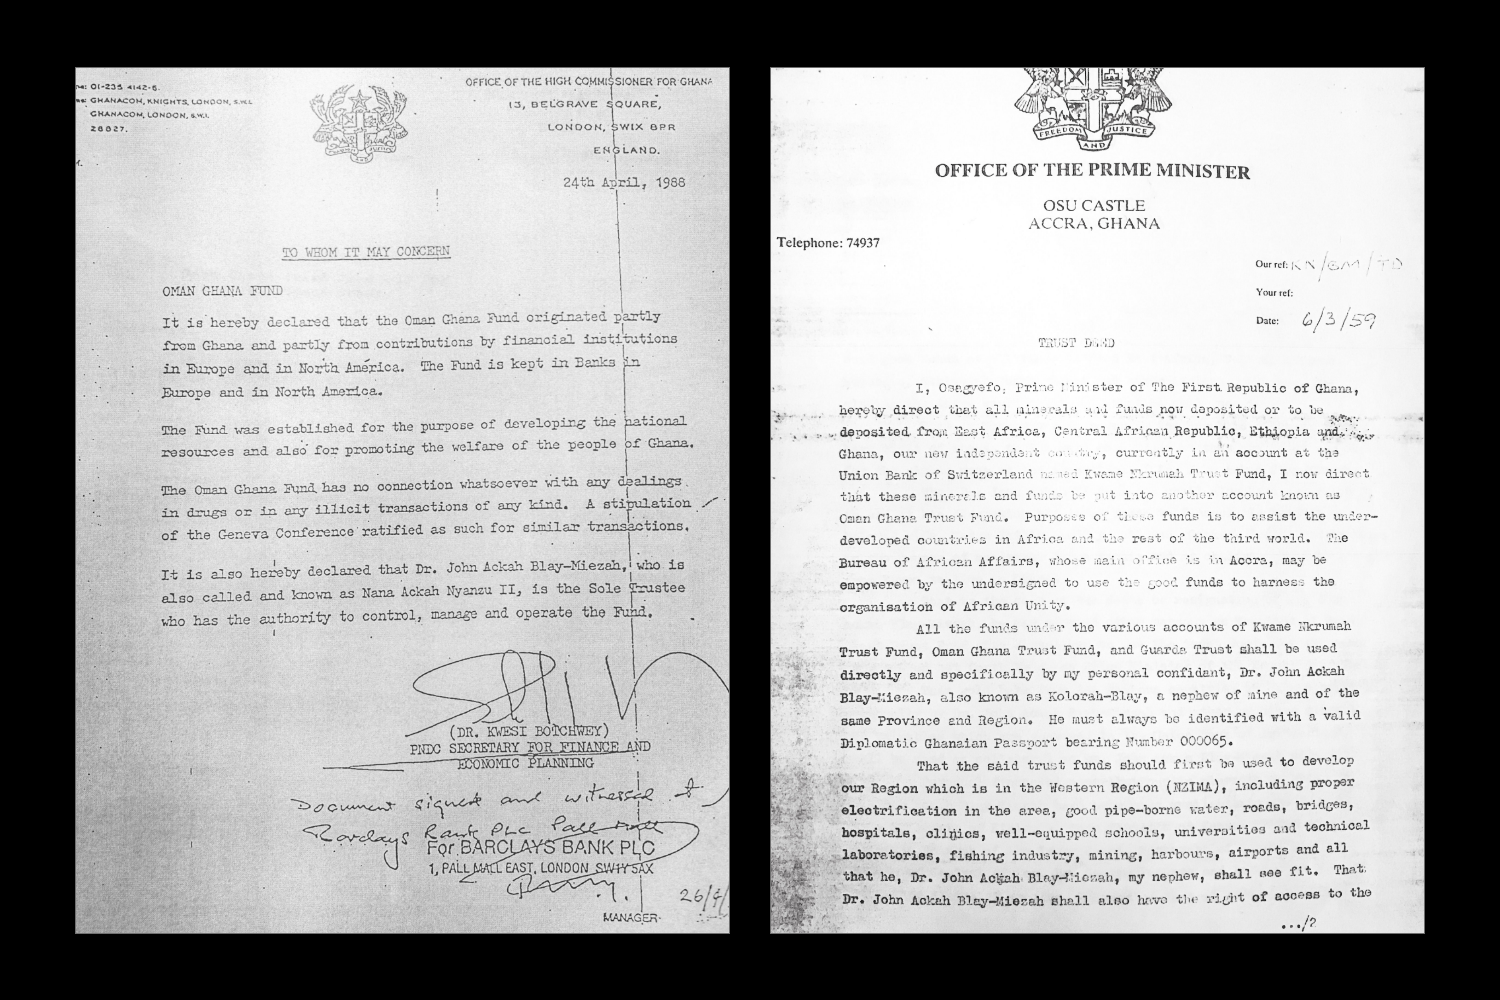 Left: A letter allegedly written by Kwesi Botchwey, Ghana's minister of finance, regarding the Oman Ghana Trust Fund. Right: The alleged deed to the Oman Ghana Trust Fund.